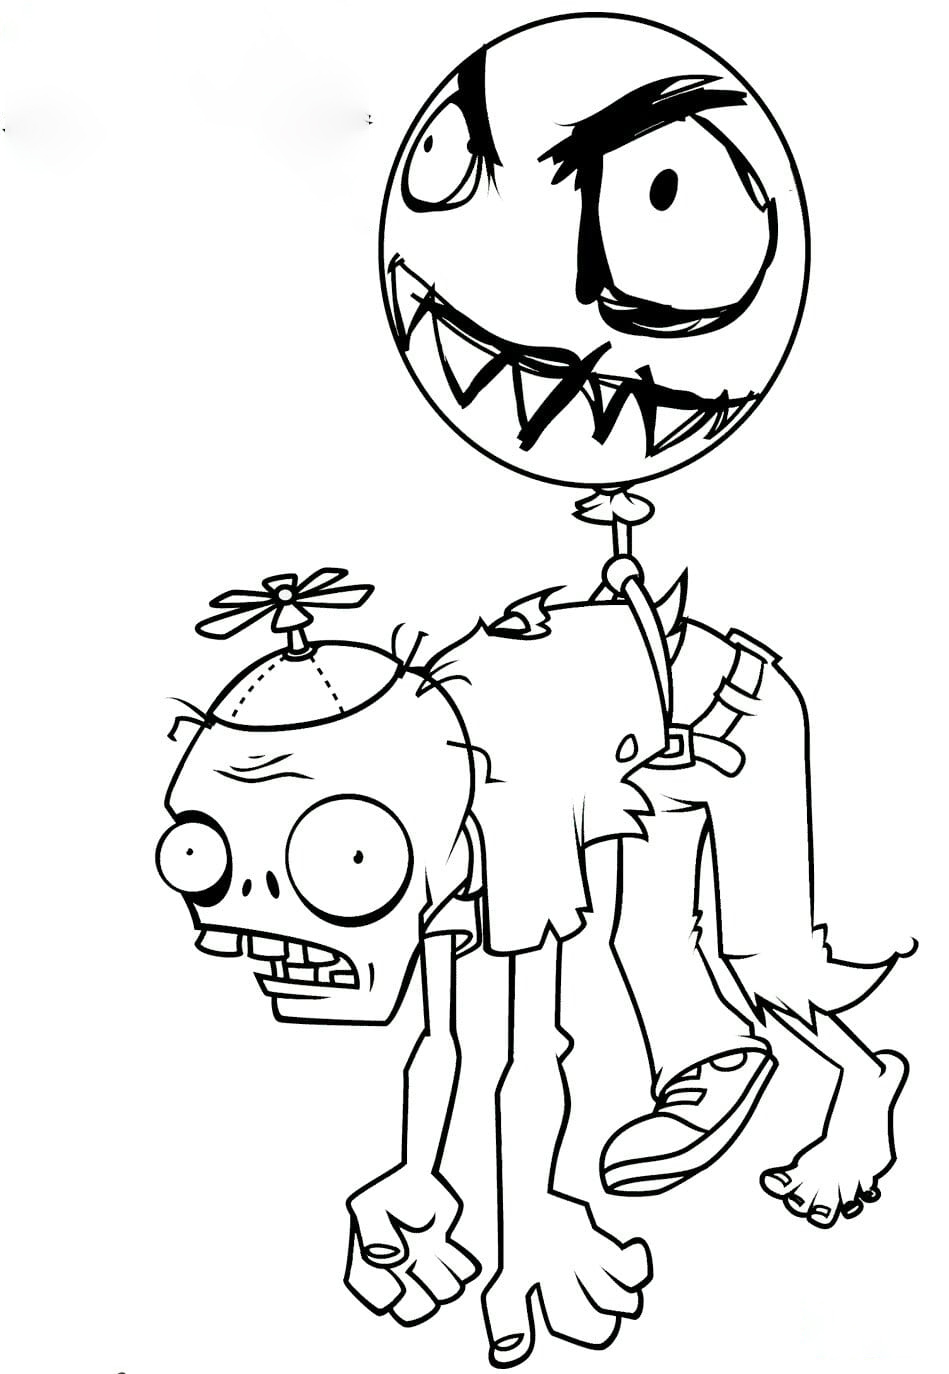 Balloon Zombie from Plants vs Zombies